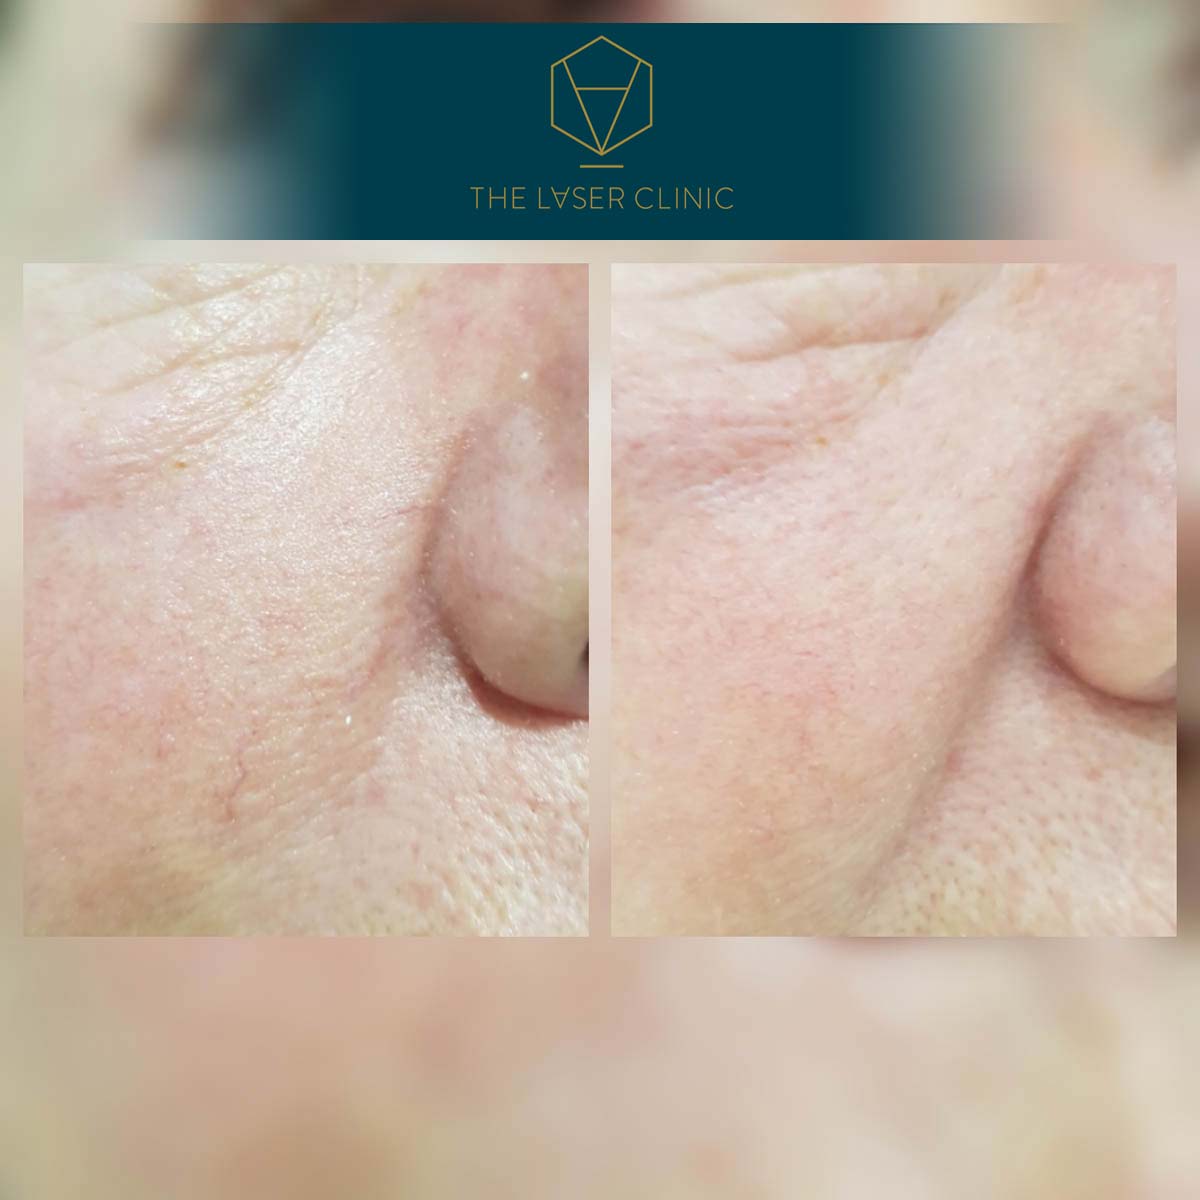 Thread Vein 2 - The Laser Clinic Exmouth